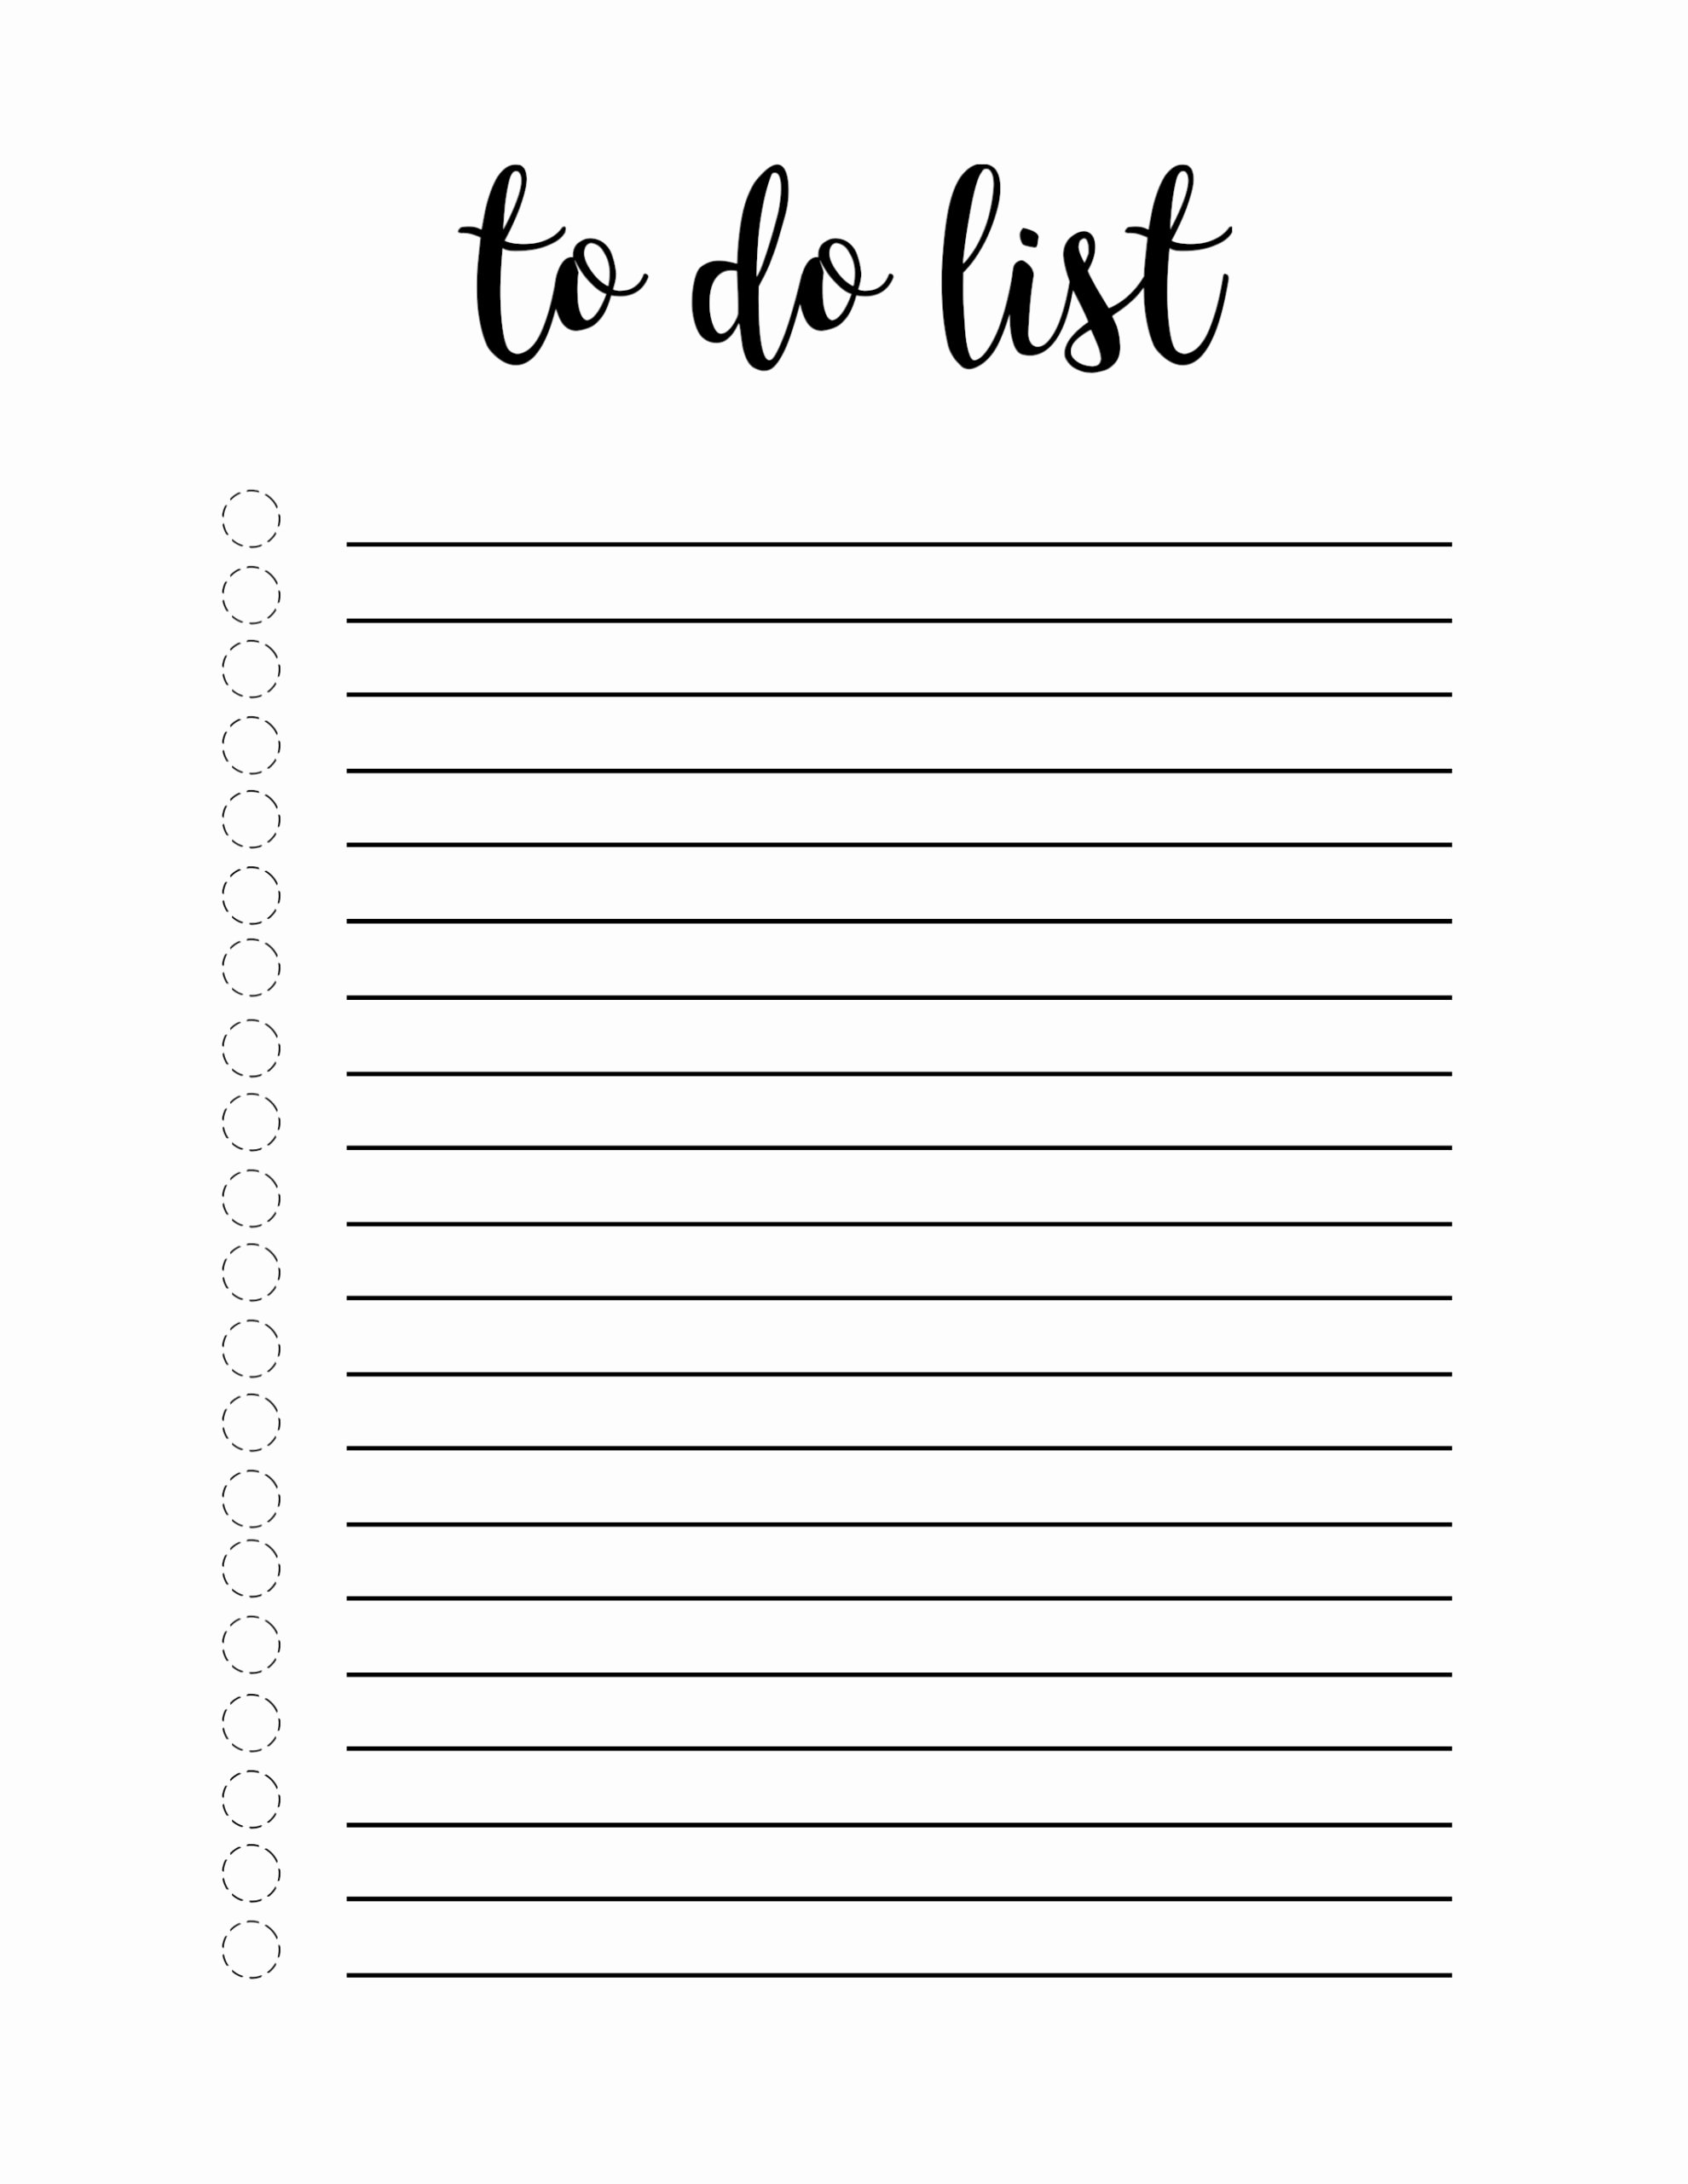 Simple White Paper Template New Free Printable to Do List Template Paper Trail Design